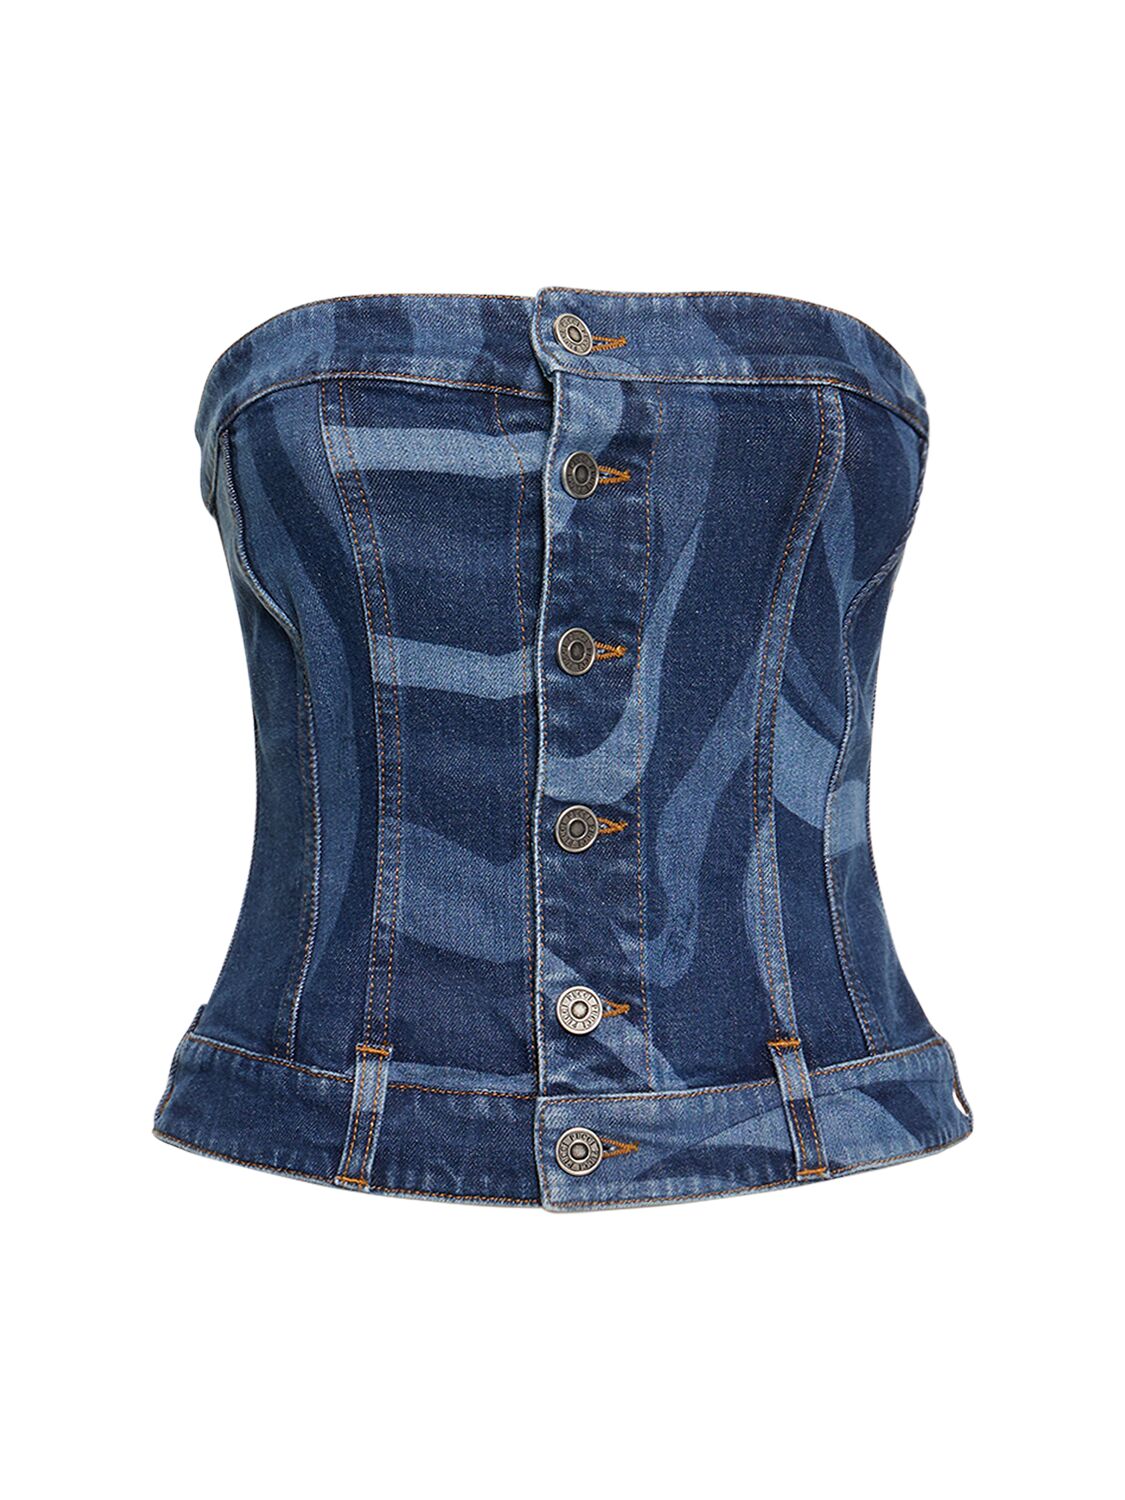 PUCCI MARMO PRINTED DENIM STRAPLESS TOP